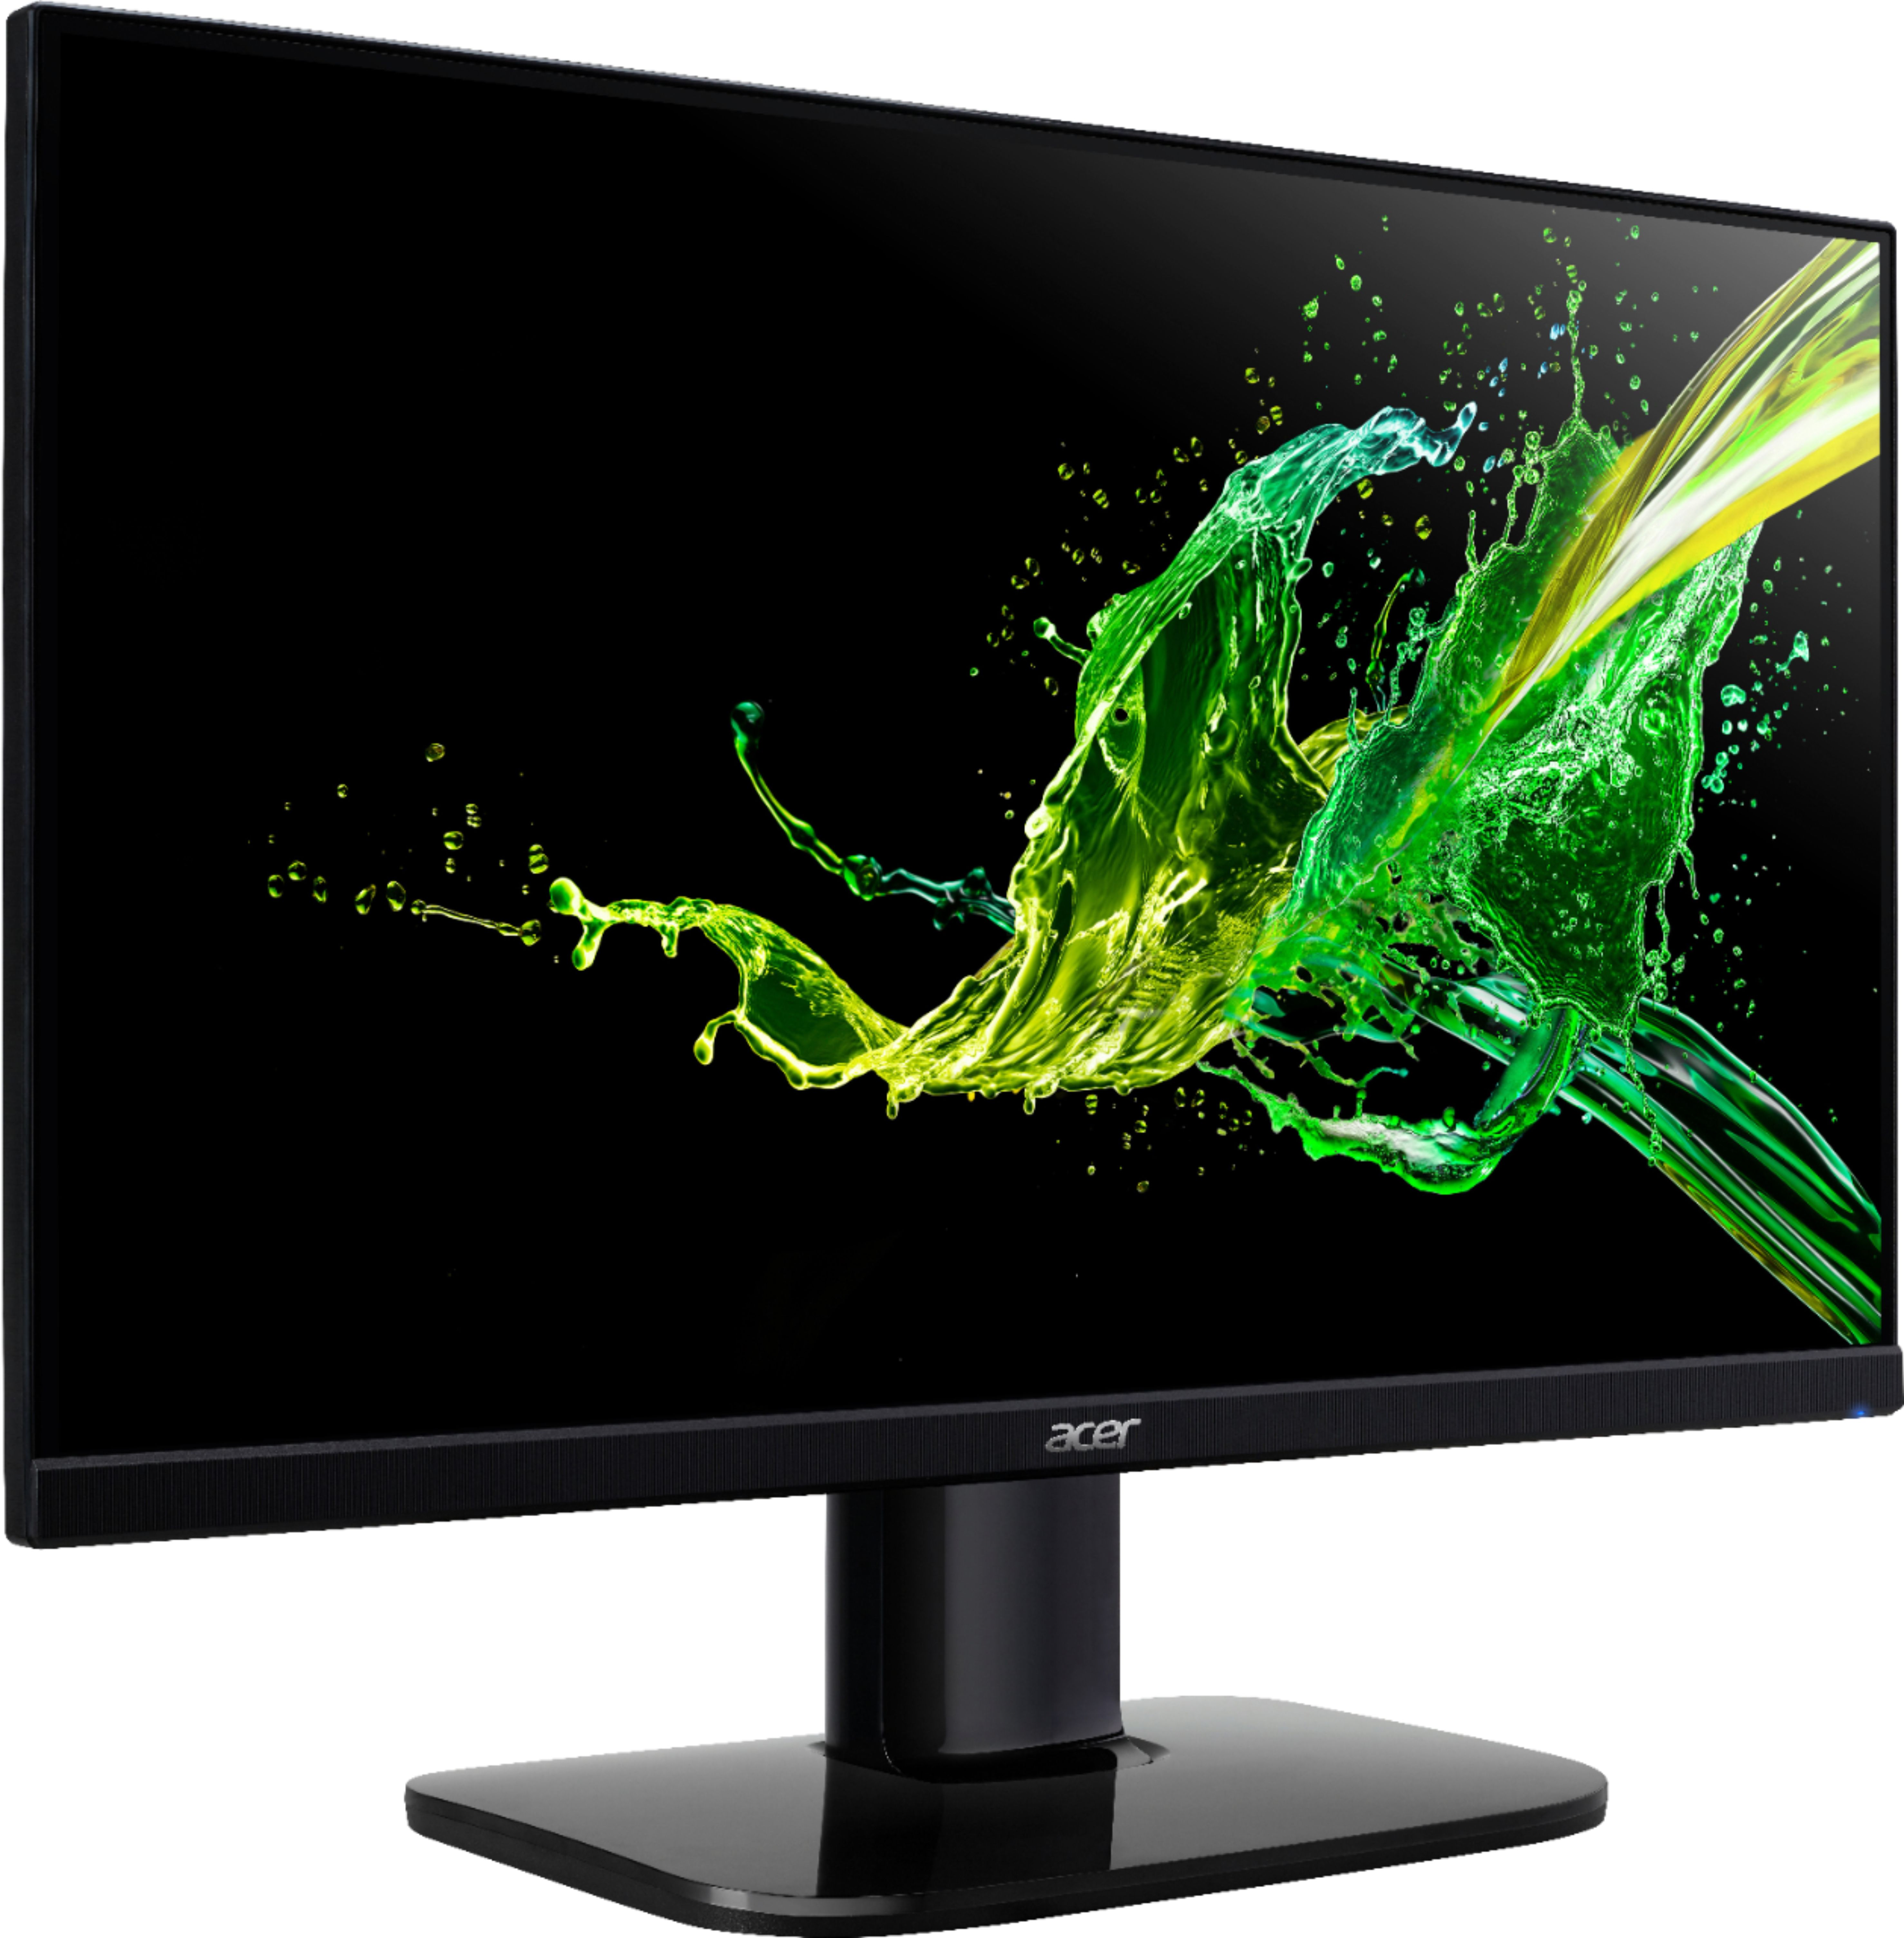 Angle View: Acer - Geek Squad Certified Refurbished 27" IPS LED FHD FreeSync Monitor - Black